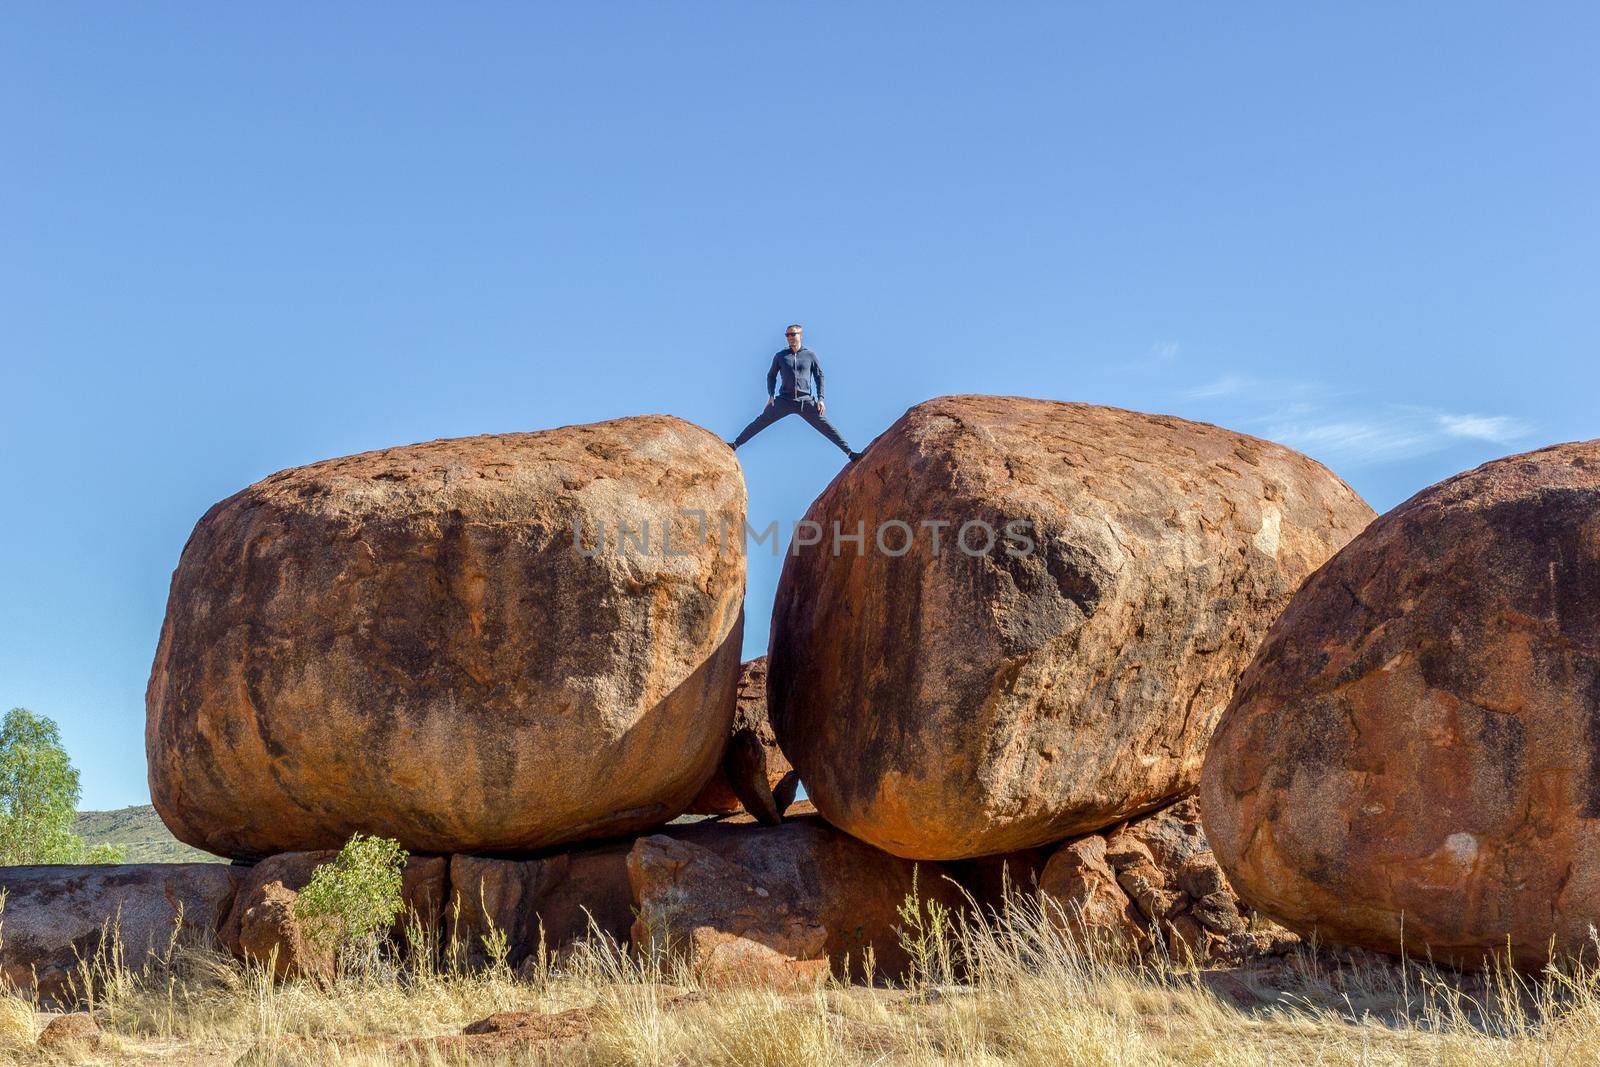 Man standing on Devils Marbels national park, outback Australlia, northern territory by bettercallcurry